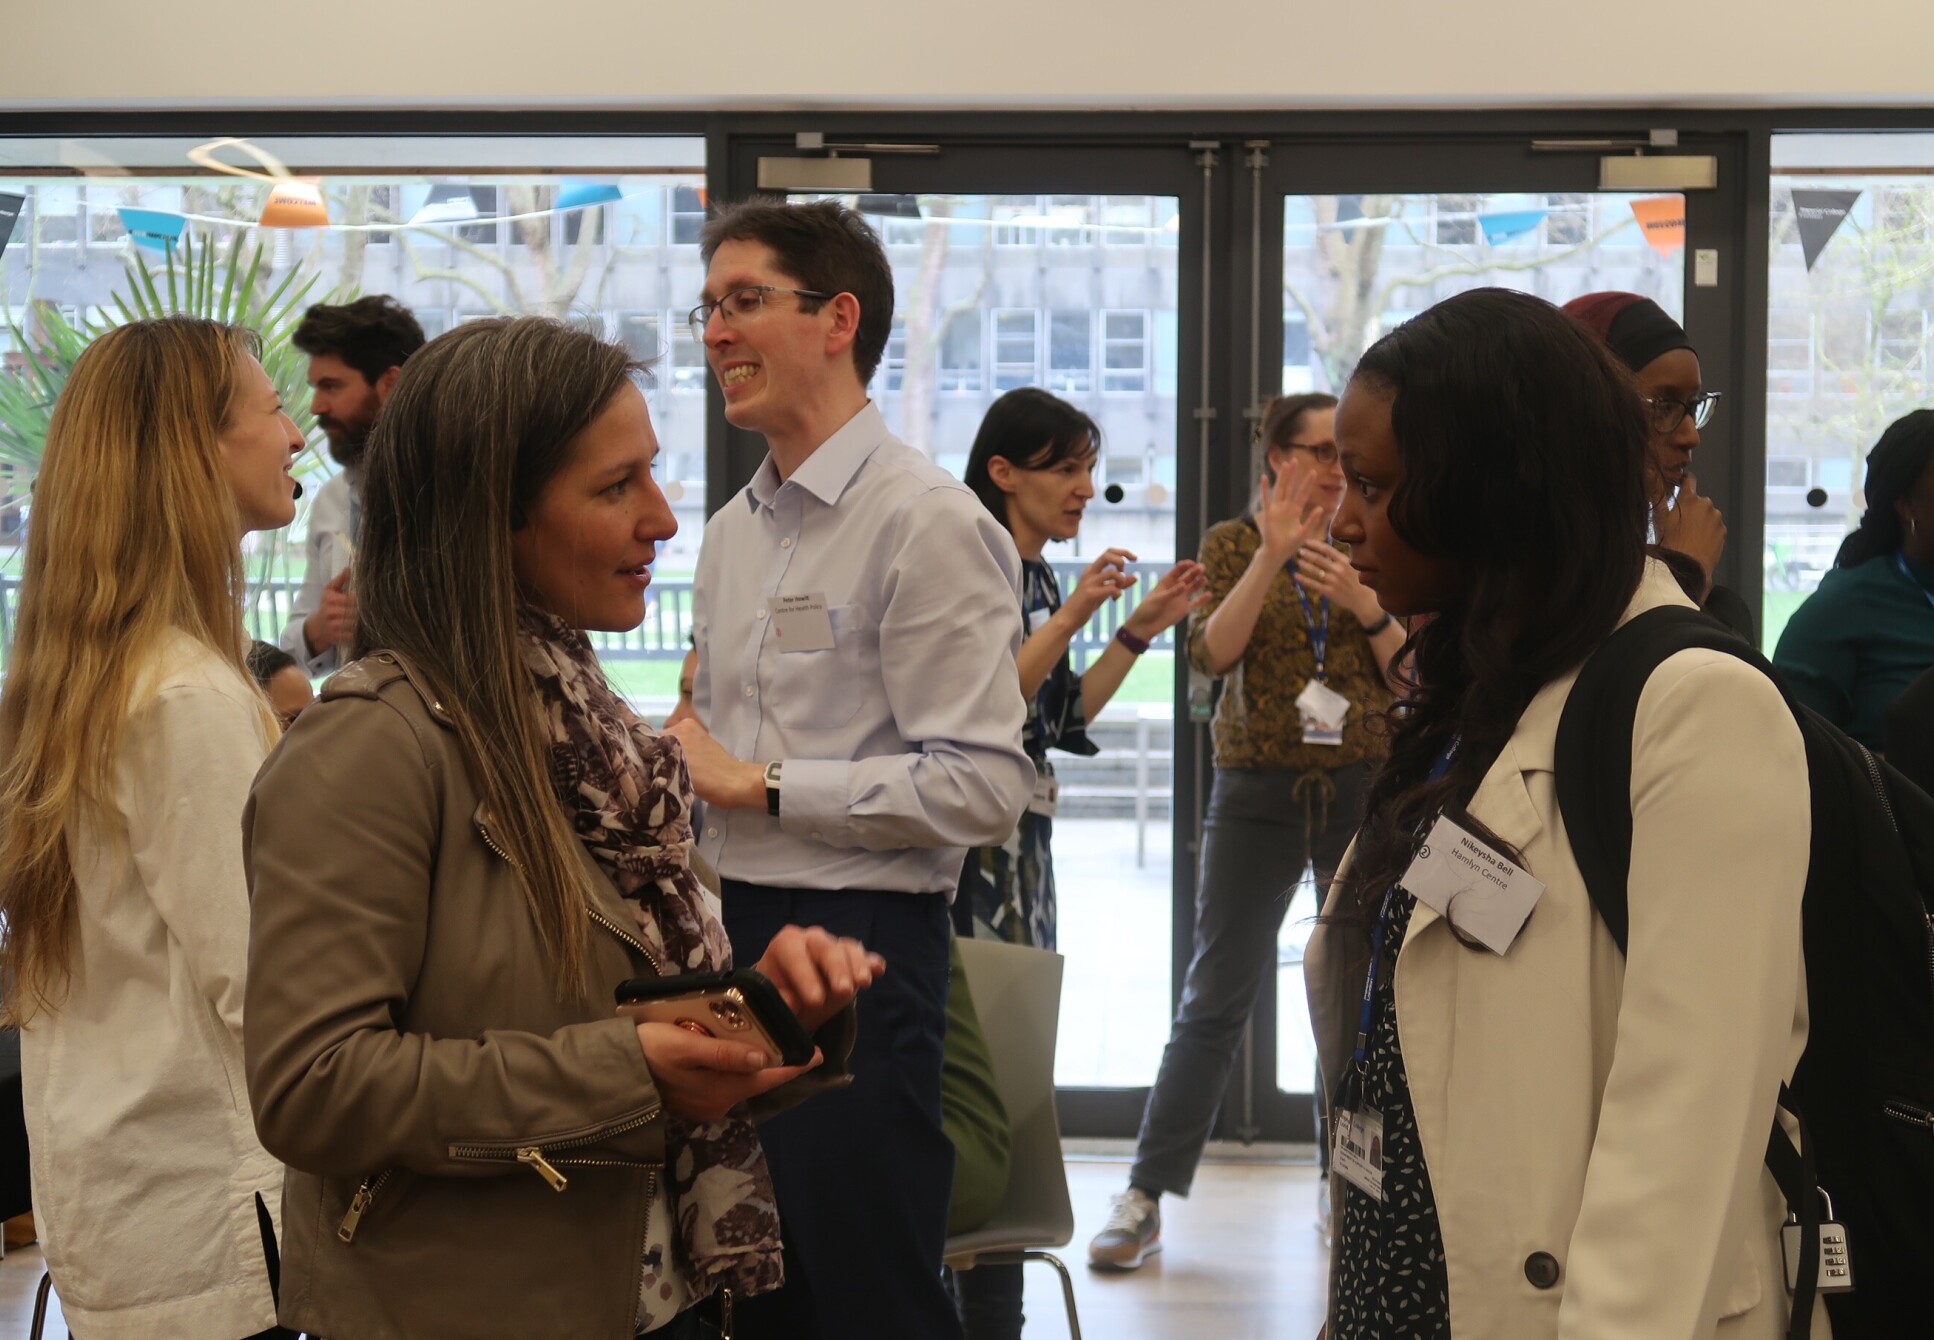 IGHI staff socialising as part of the speed networking session. Credits: Holly Merton/IGHI 